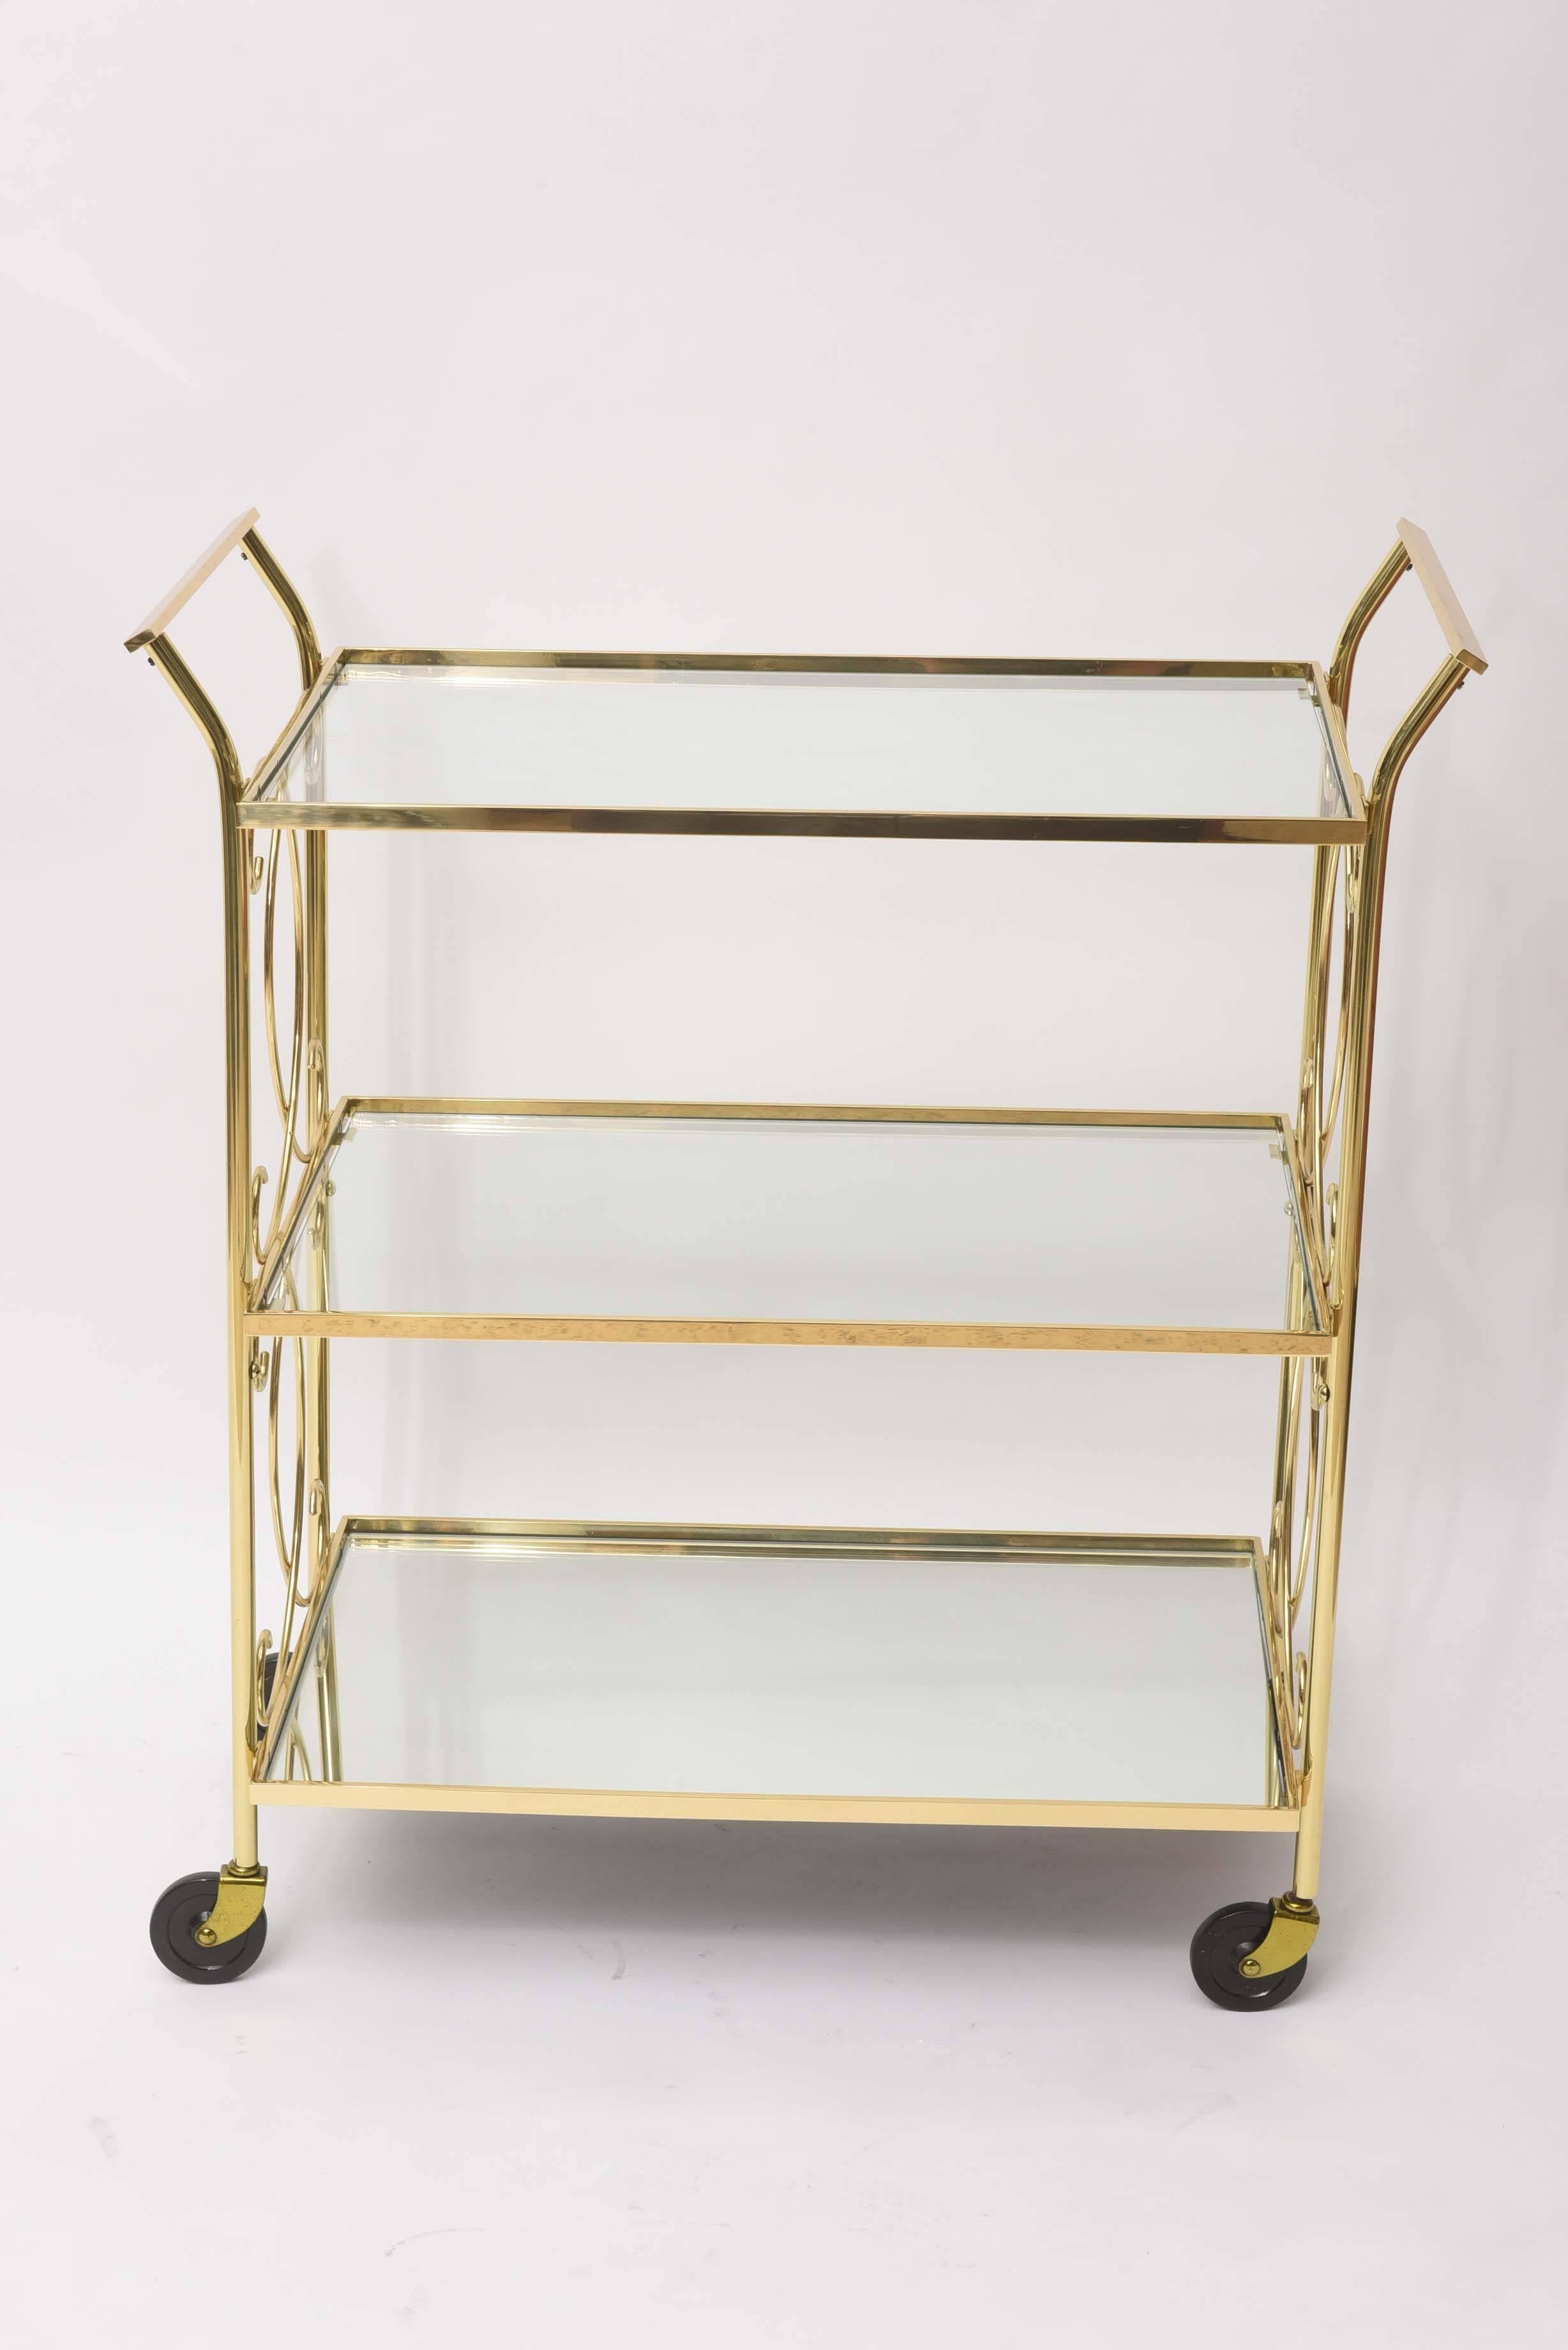 Winsome polished brass Italian drinks trolley or tea cart. This three-tiered Italian beauty has two glass shelves floating above a reflective mirrored bottom shelf. Professionally restored.